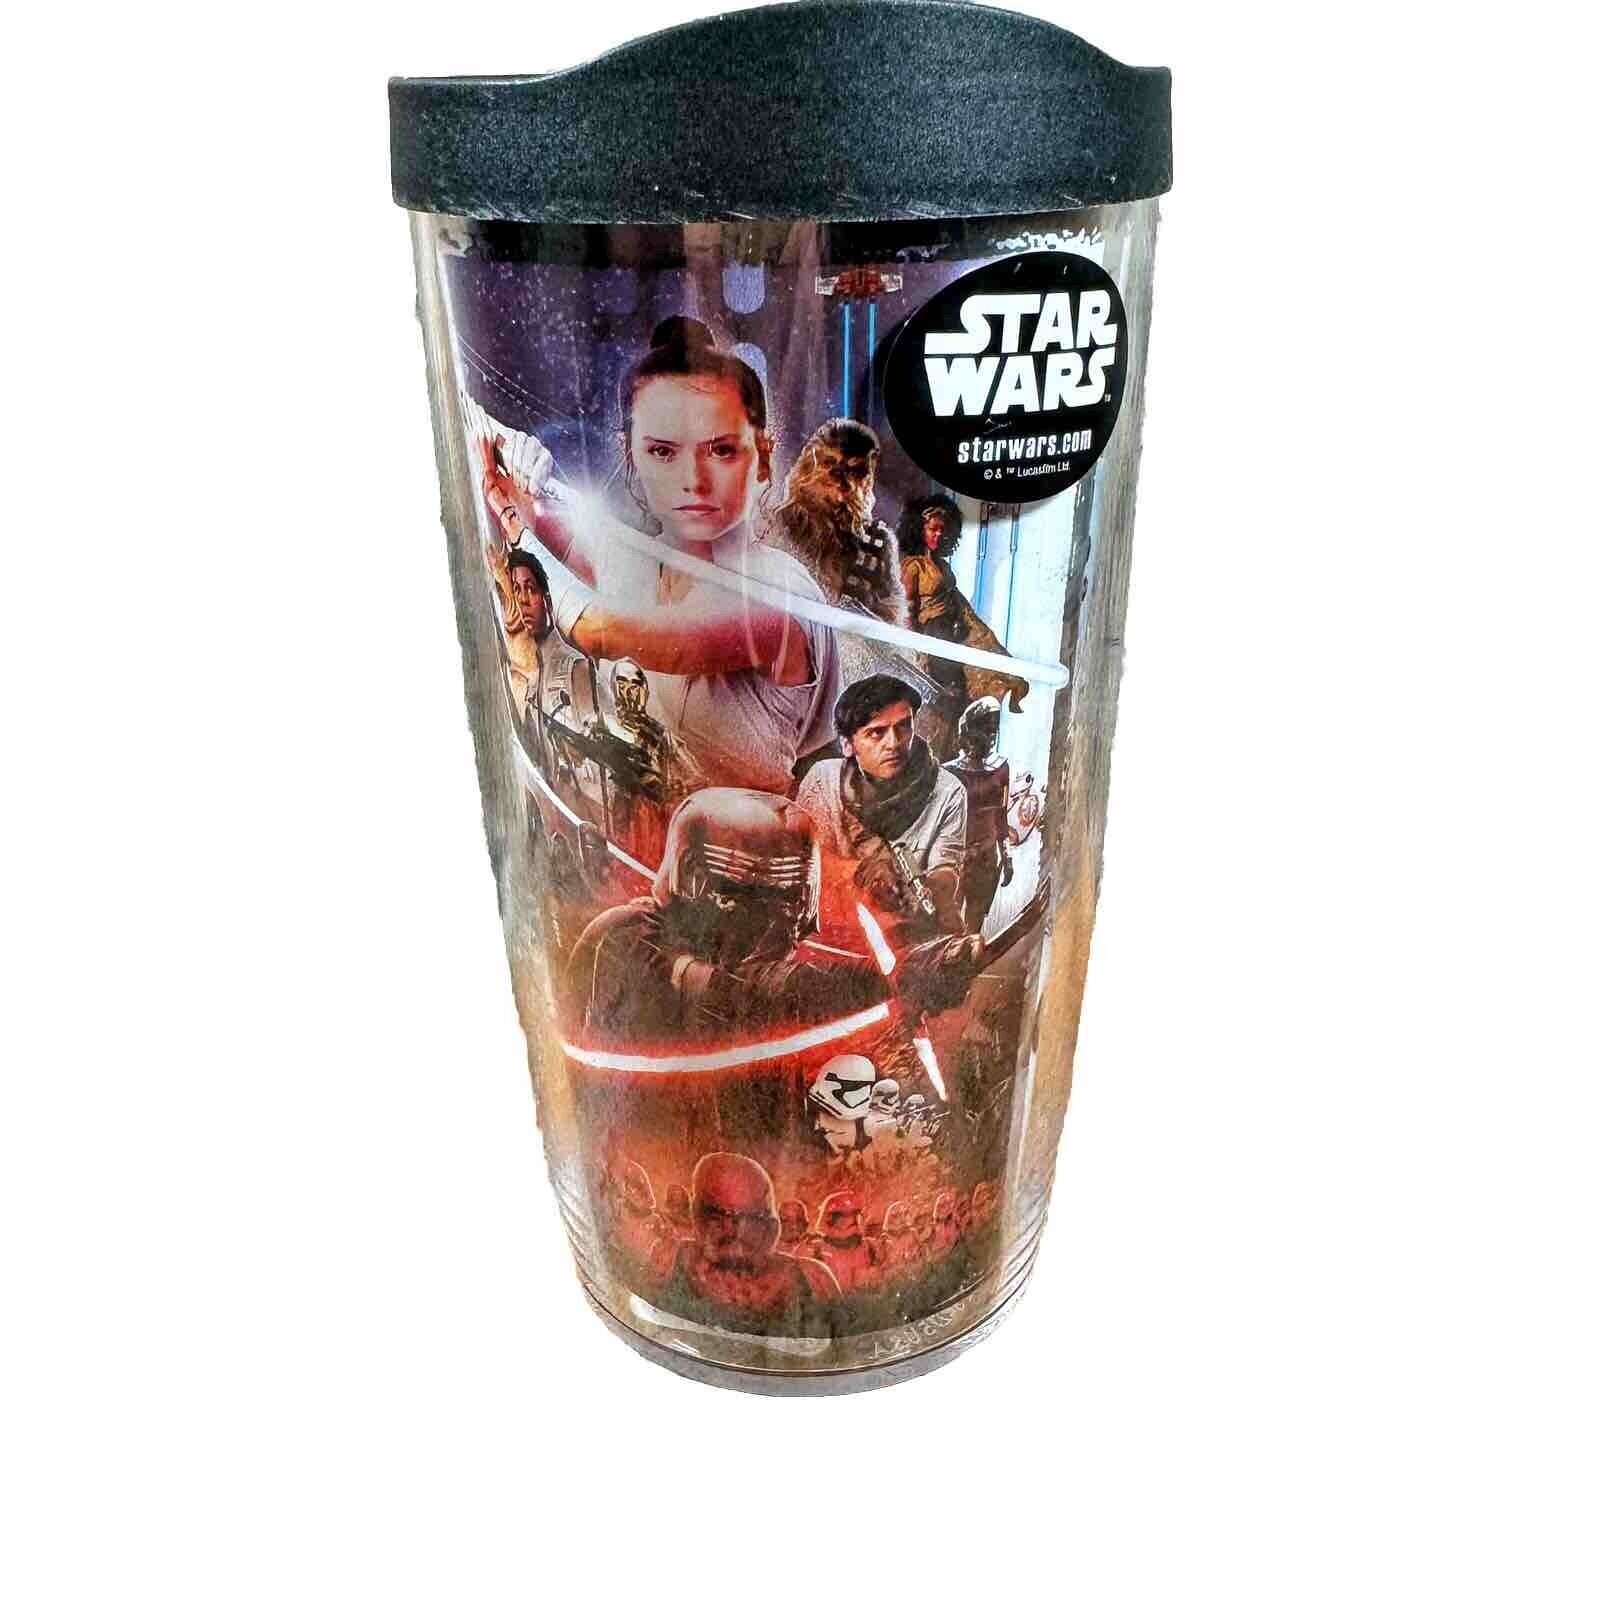 Tervis STAR WARS Tumbler Insulated 16oz Travel Cup w/Lid Episode IX NEW